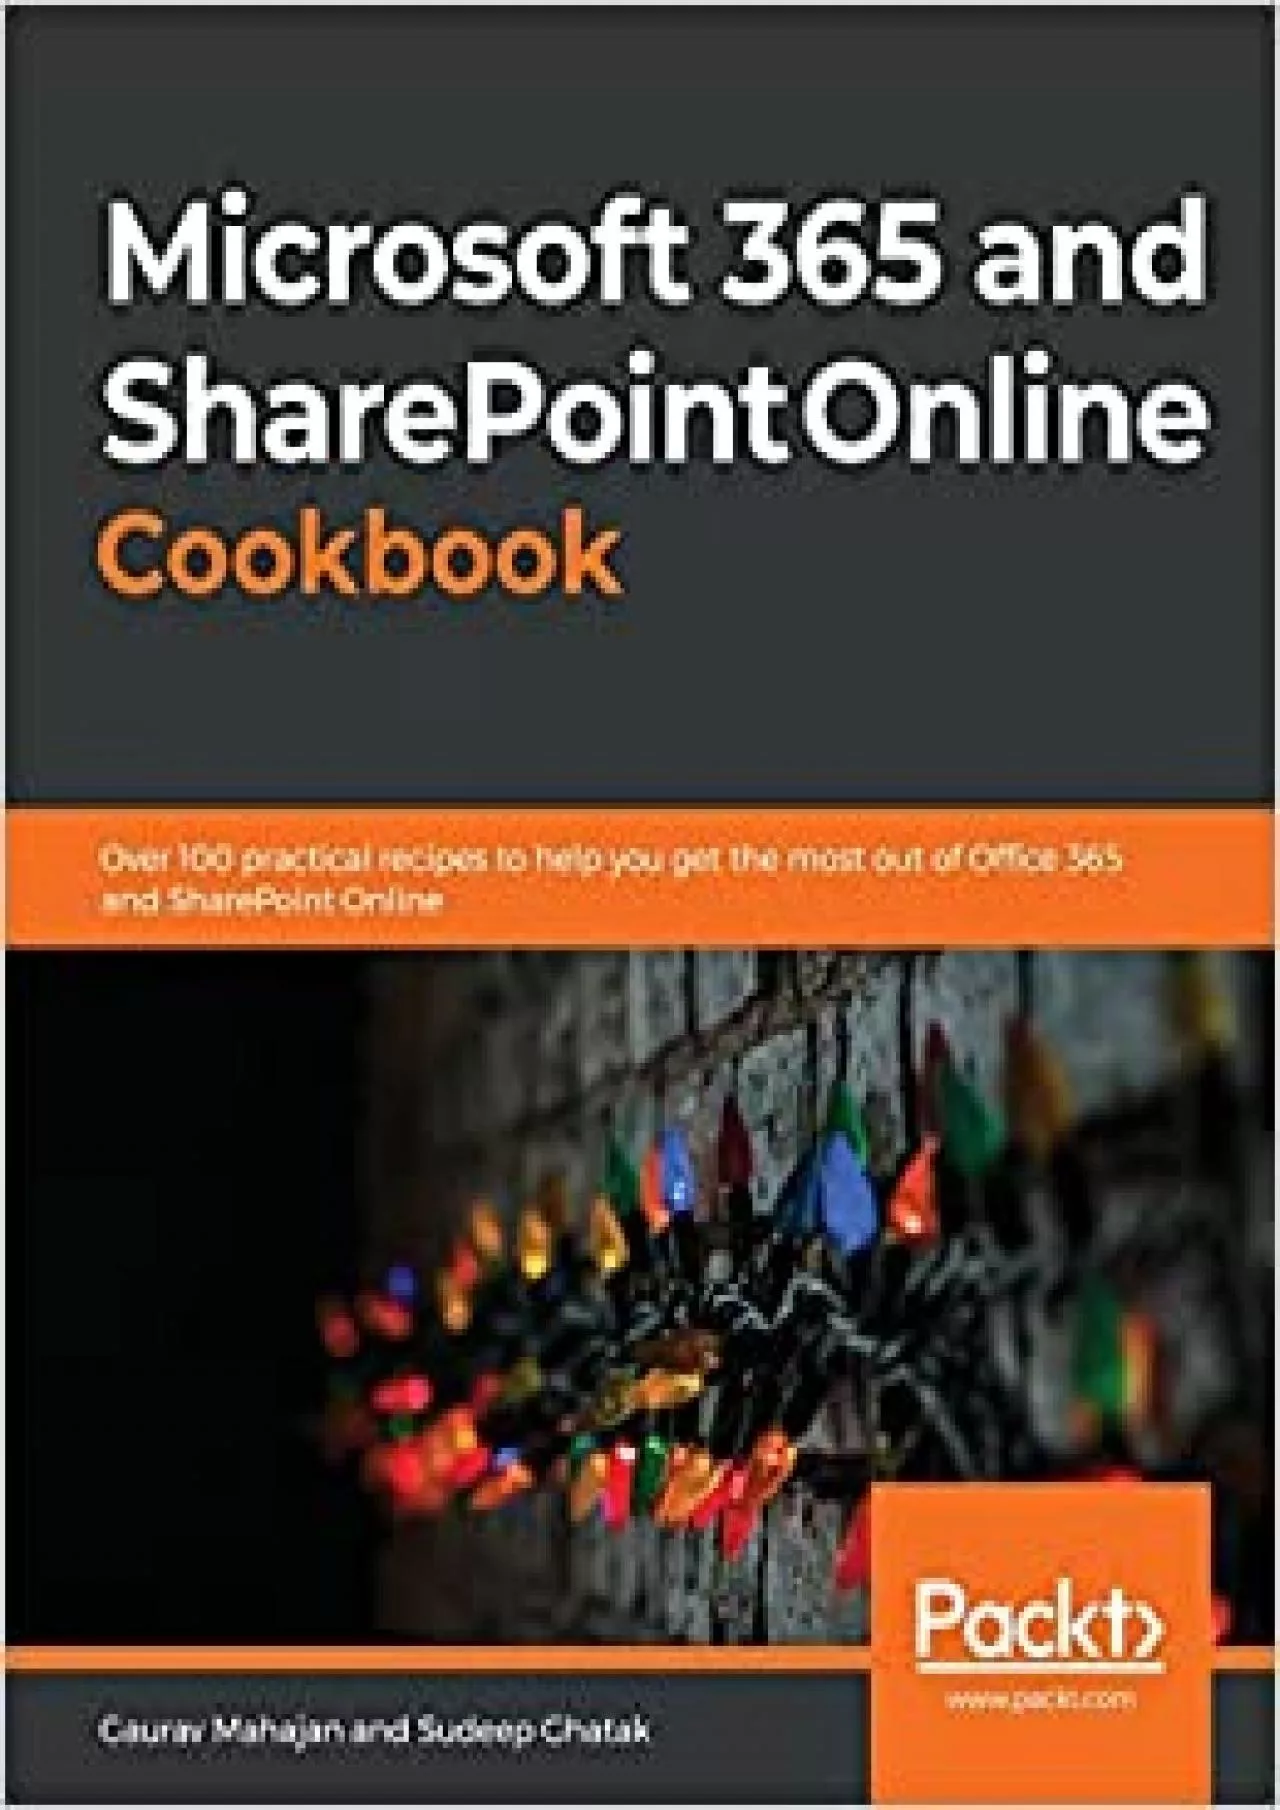 Microsoft 365 and SharePoint Online Cookbook: Over 100 practical recipes to help you get